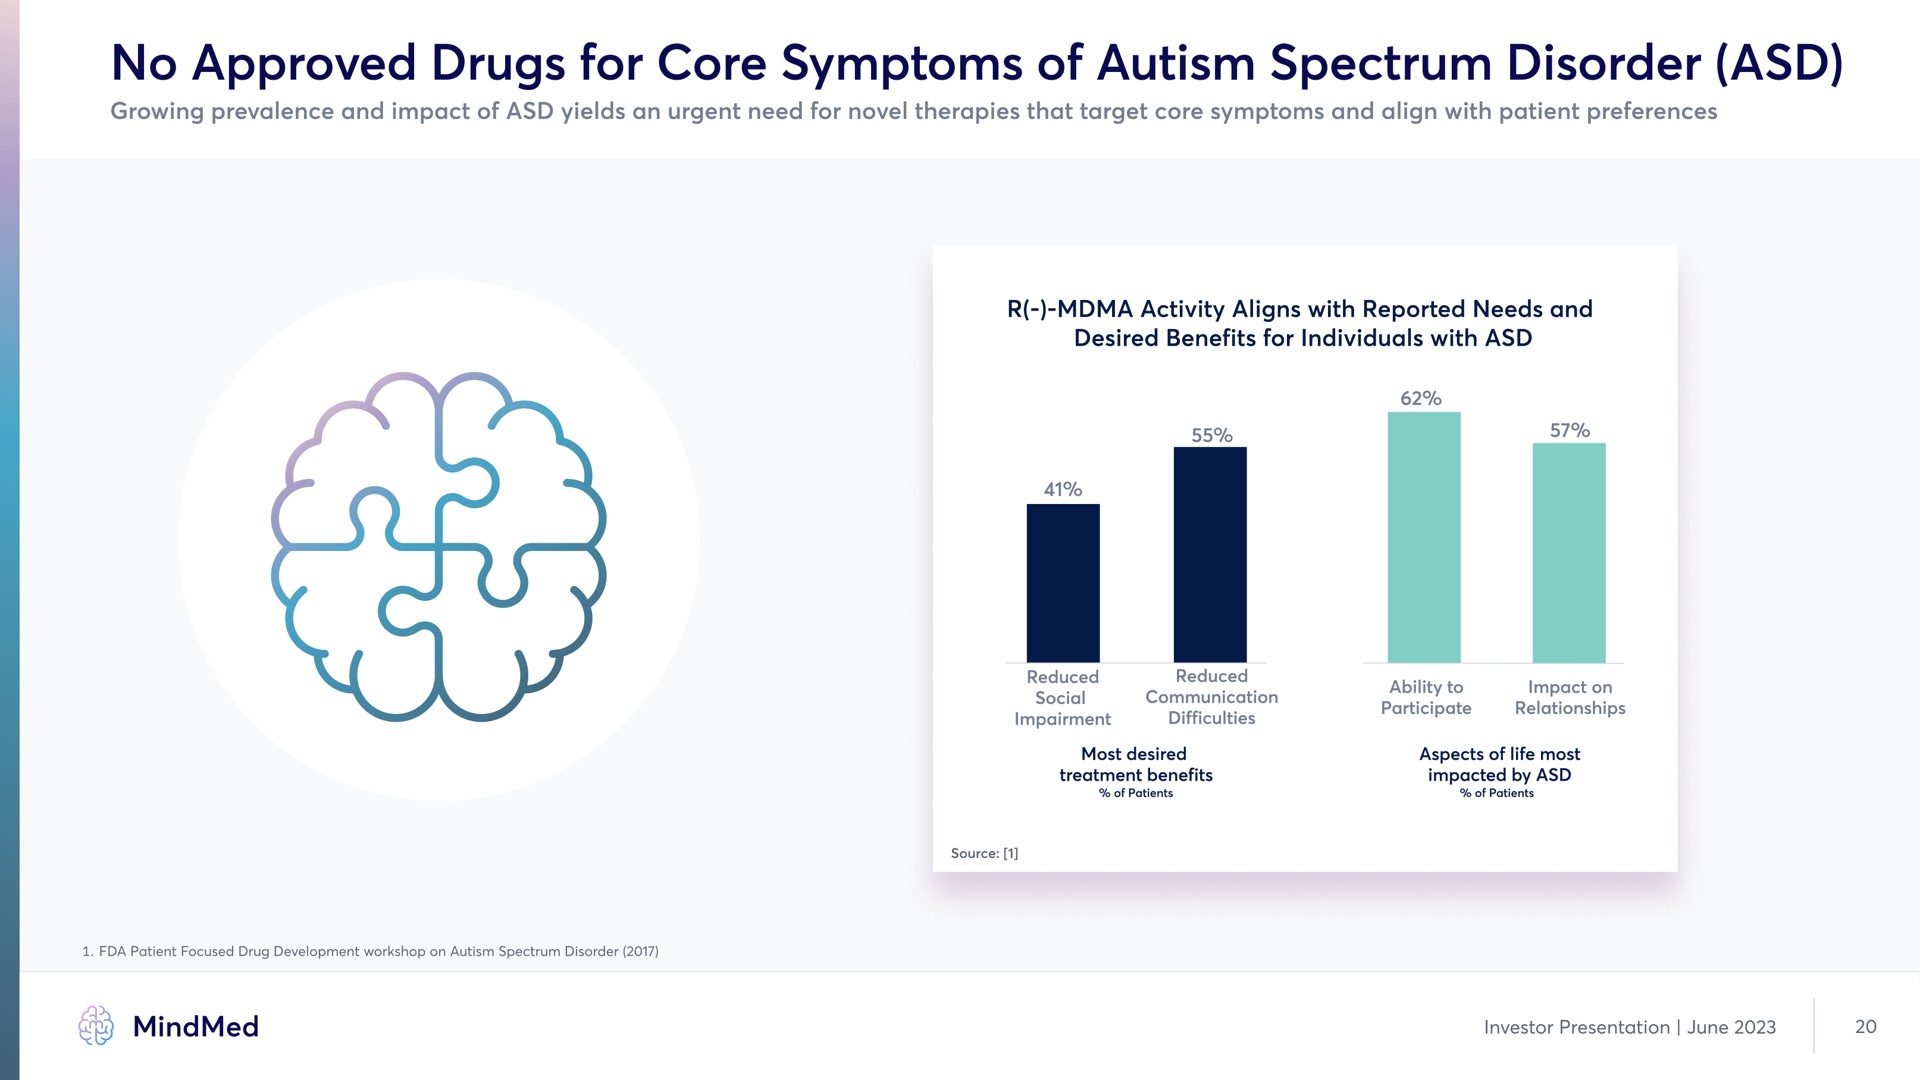 no approved drugs for core symptoms of autism spectrum disorder | MindMed